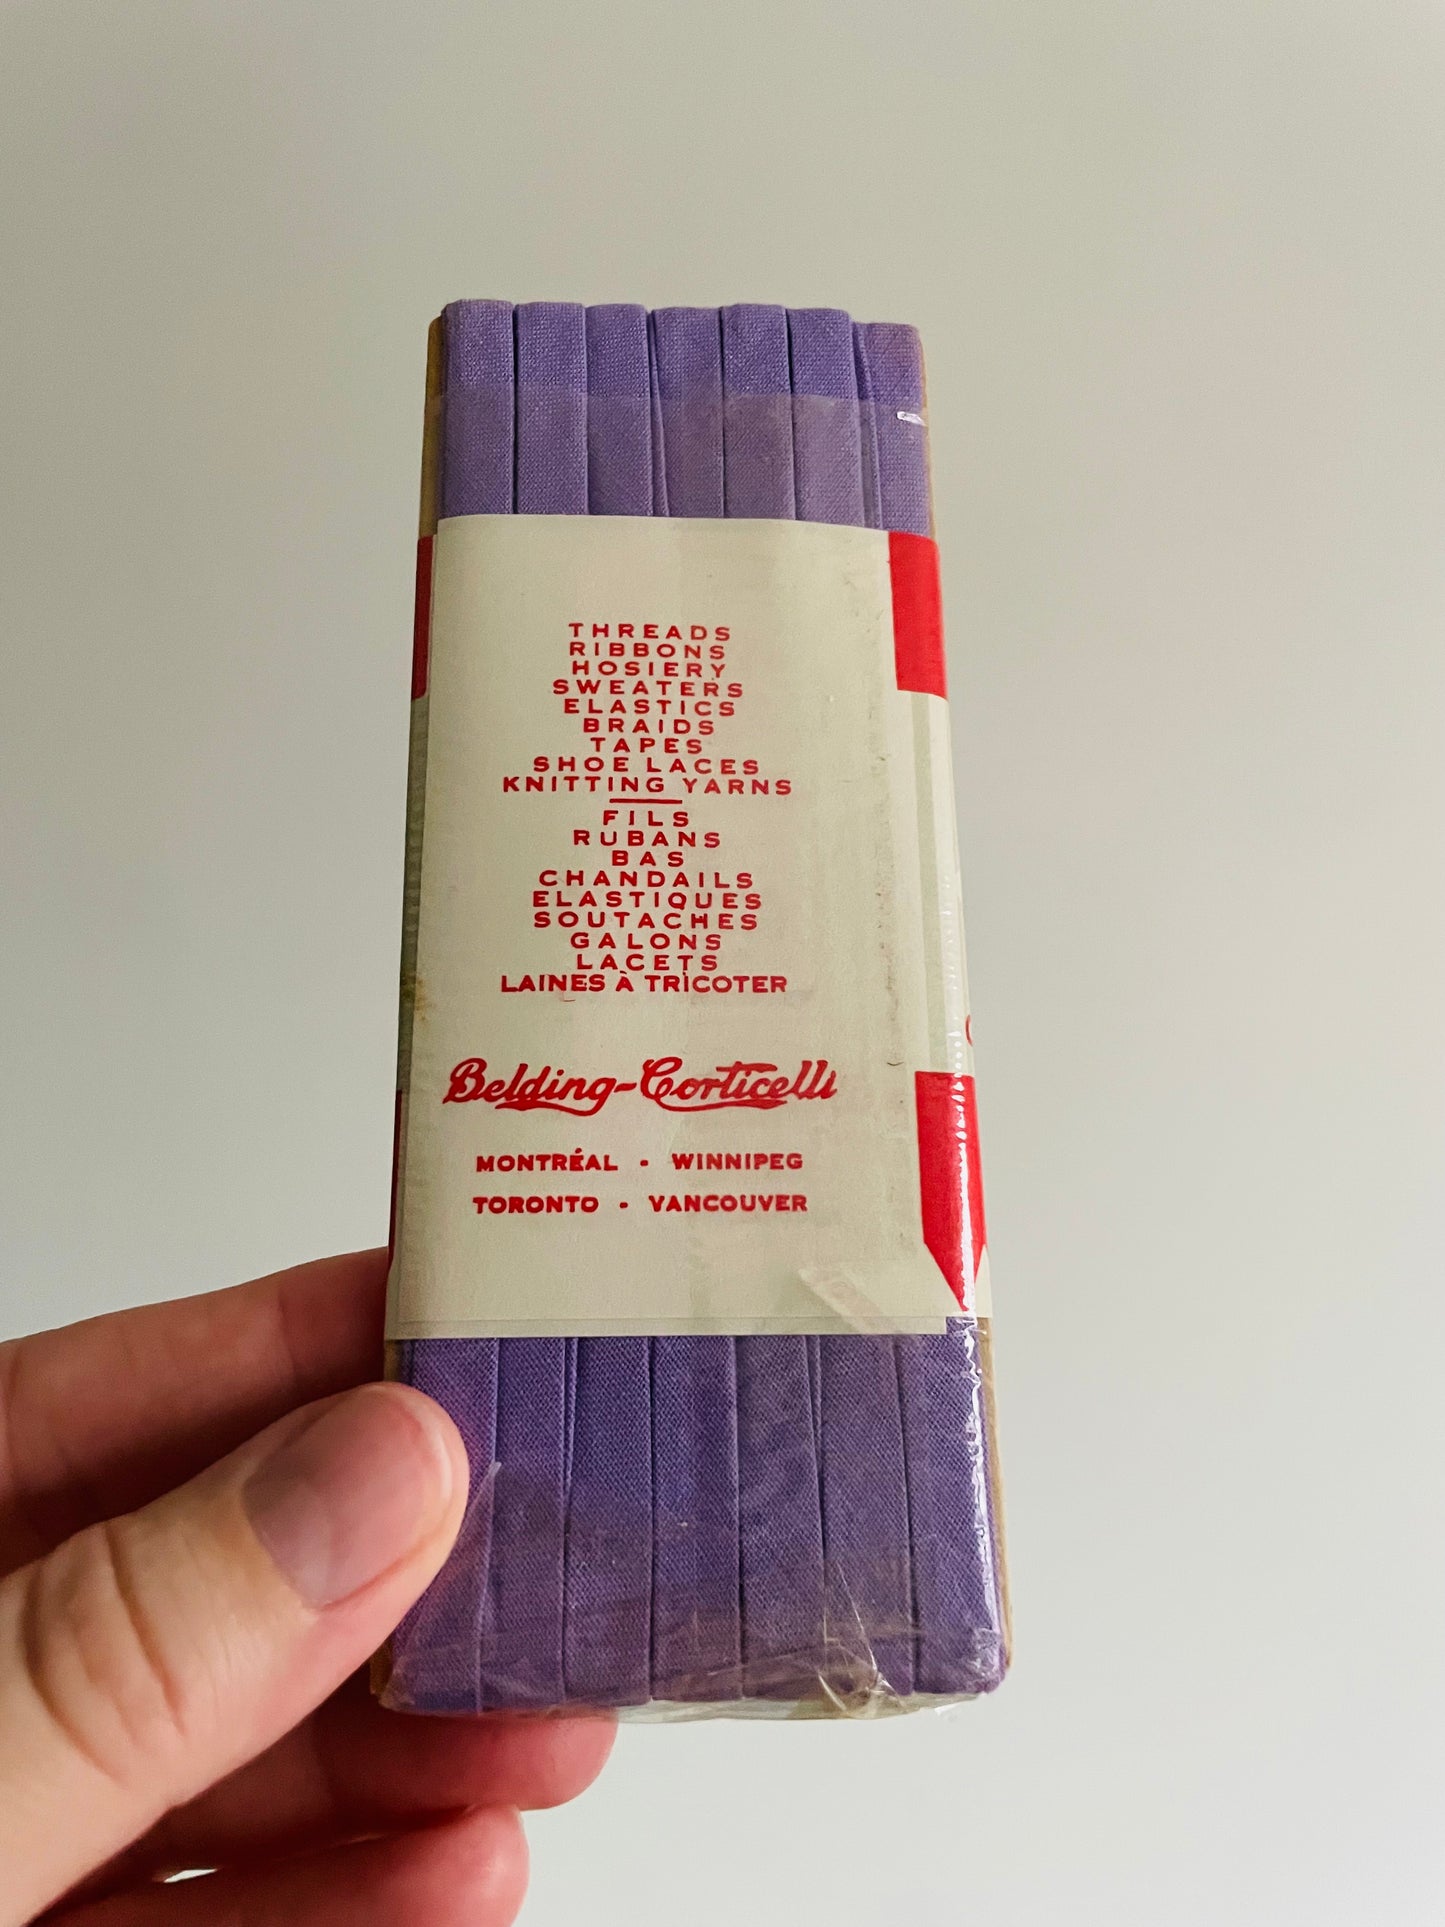 Shades of Purple Corticelli & Ardee Double Fold Bias Tape - Brand New Vintage in Original Packaging - Set of 5